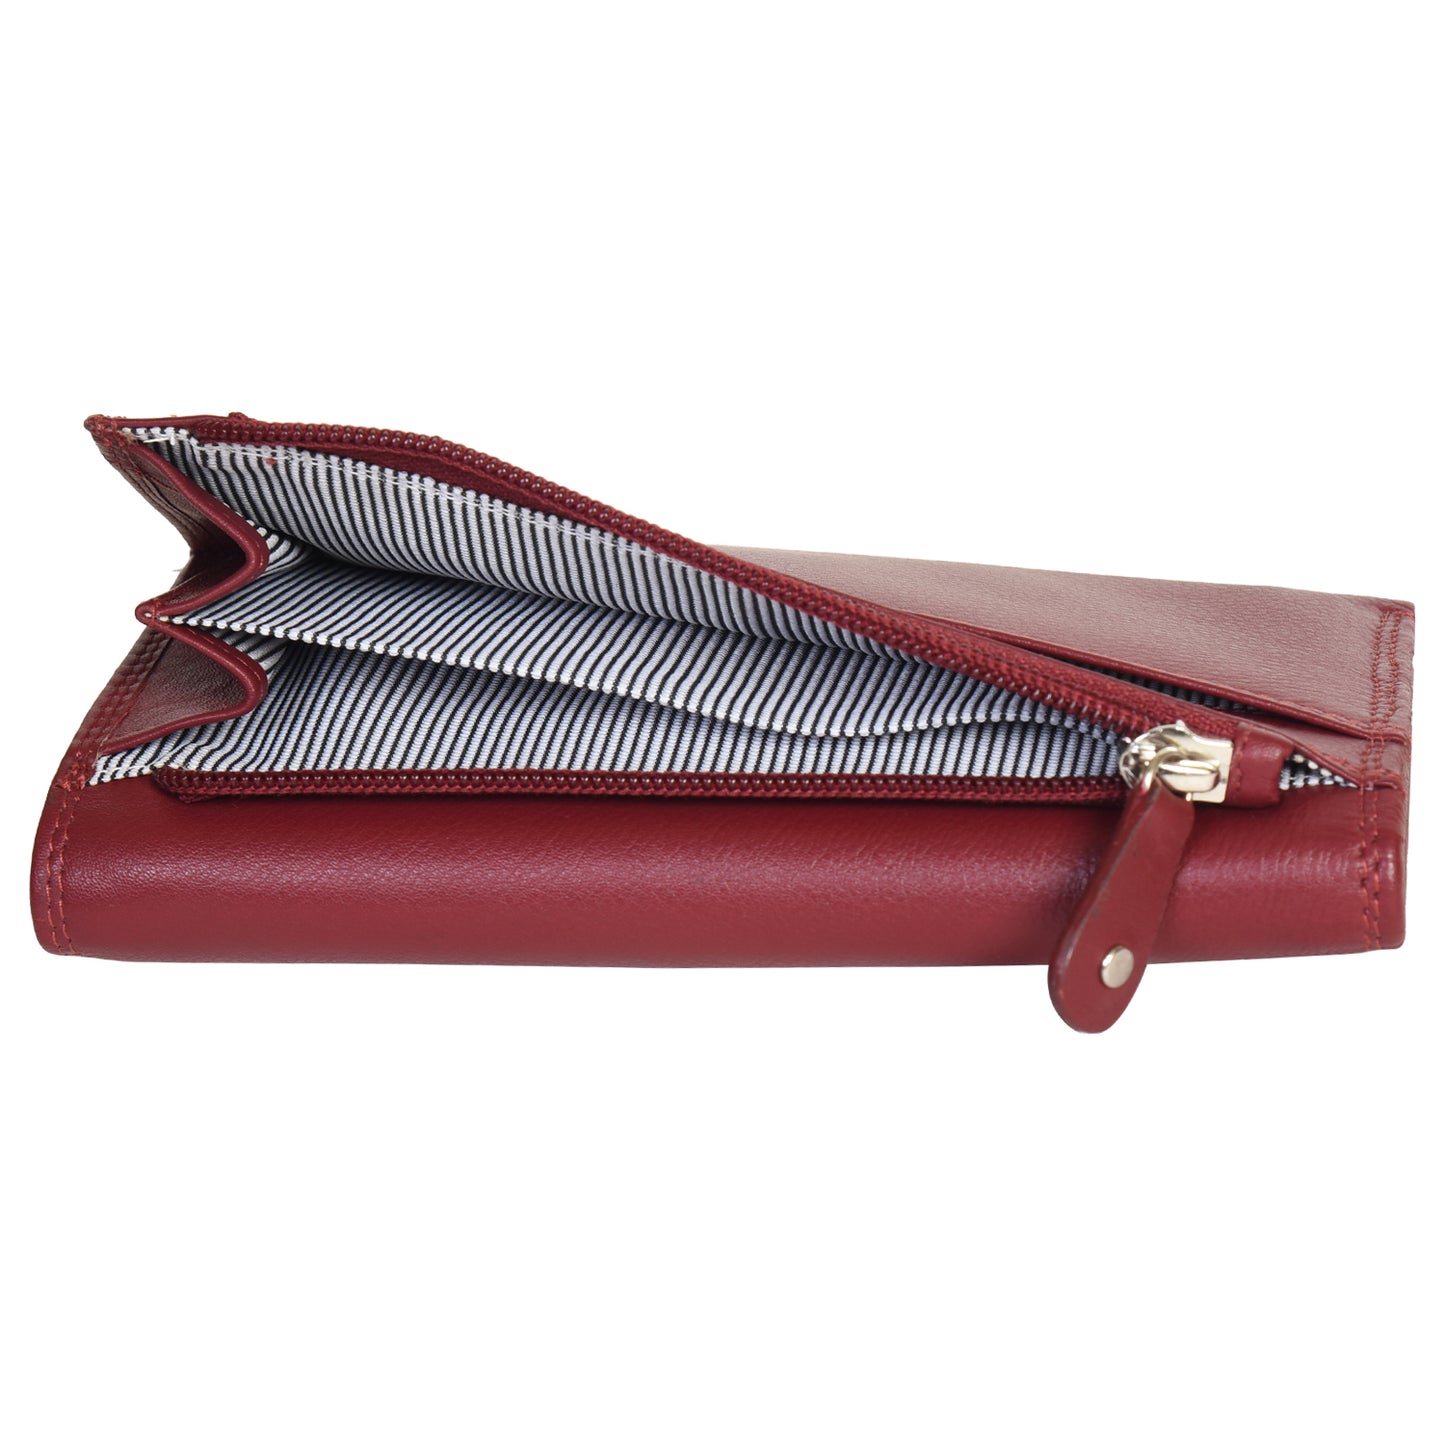 GT-TP10: G&T Full-grain Leather Long Trifold Purse, Clutch (RFID Protected)